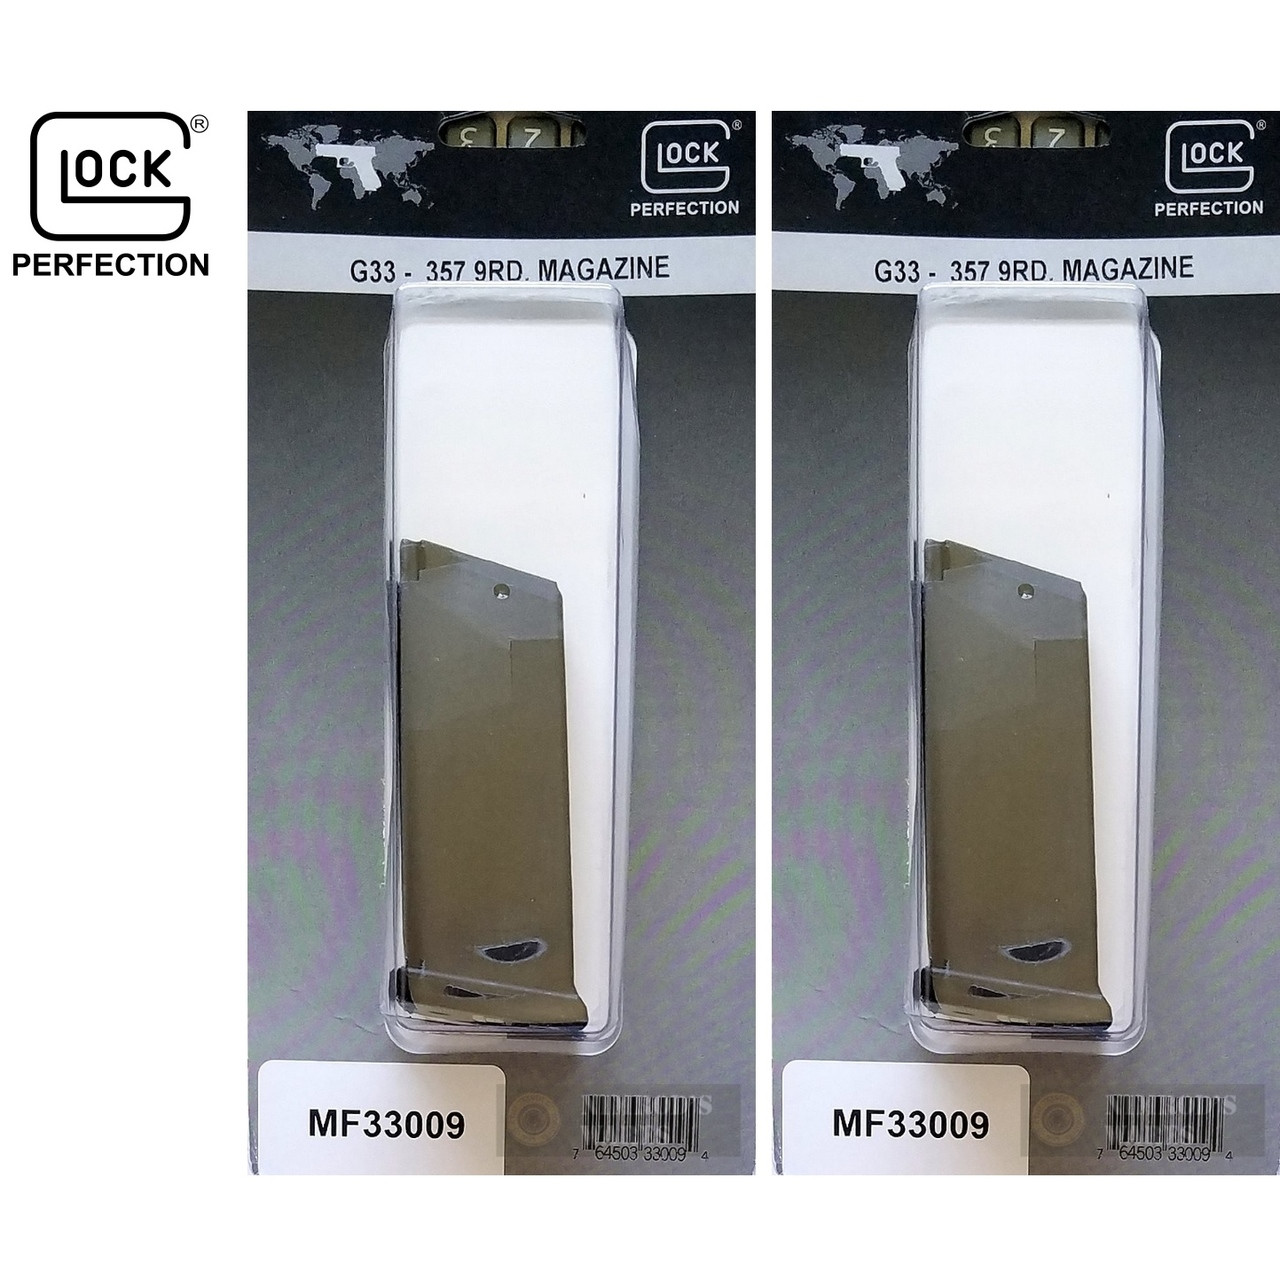 10MM 10 RD Round Pistol Factory Magazine Glock Perfection 10020 3PACK 